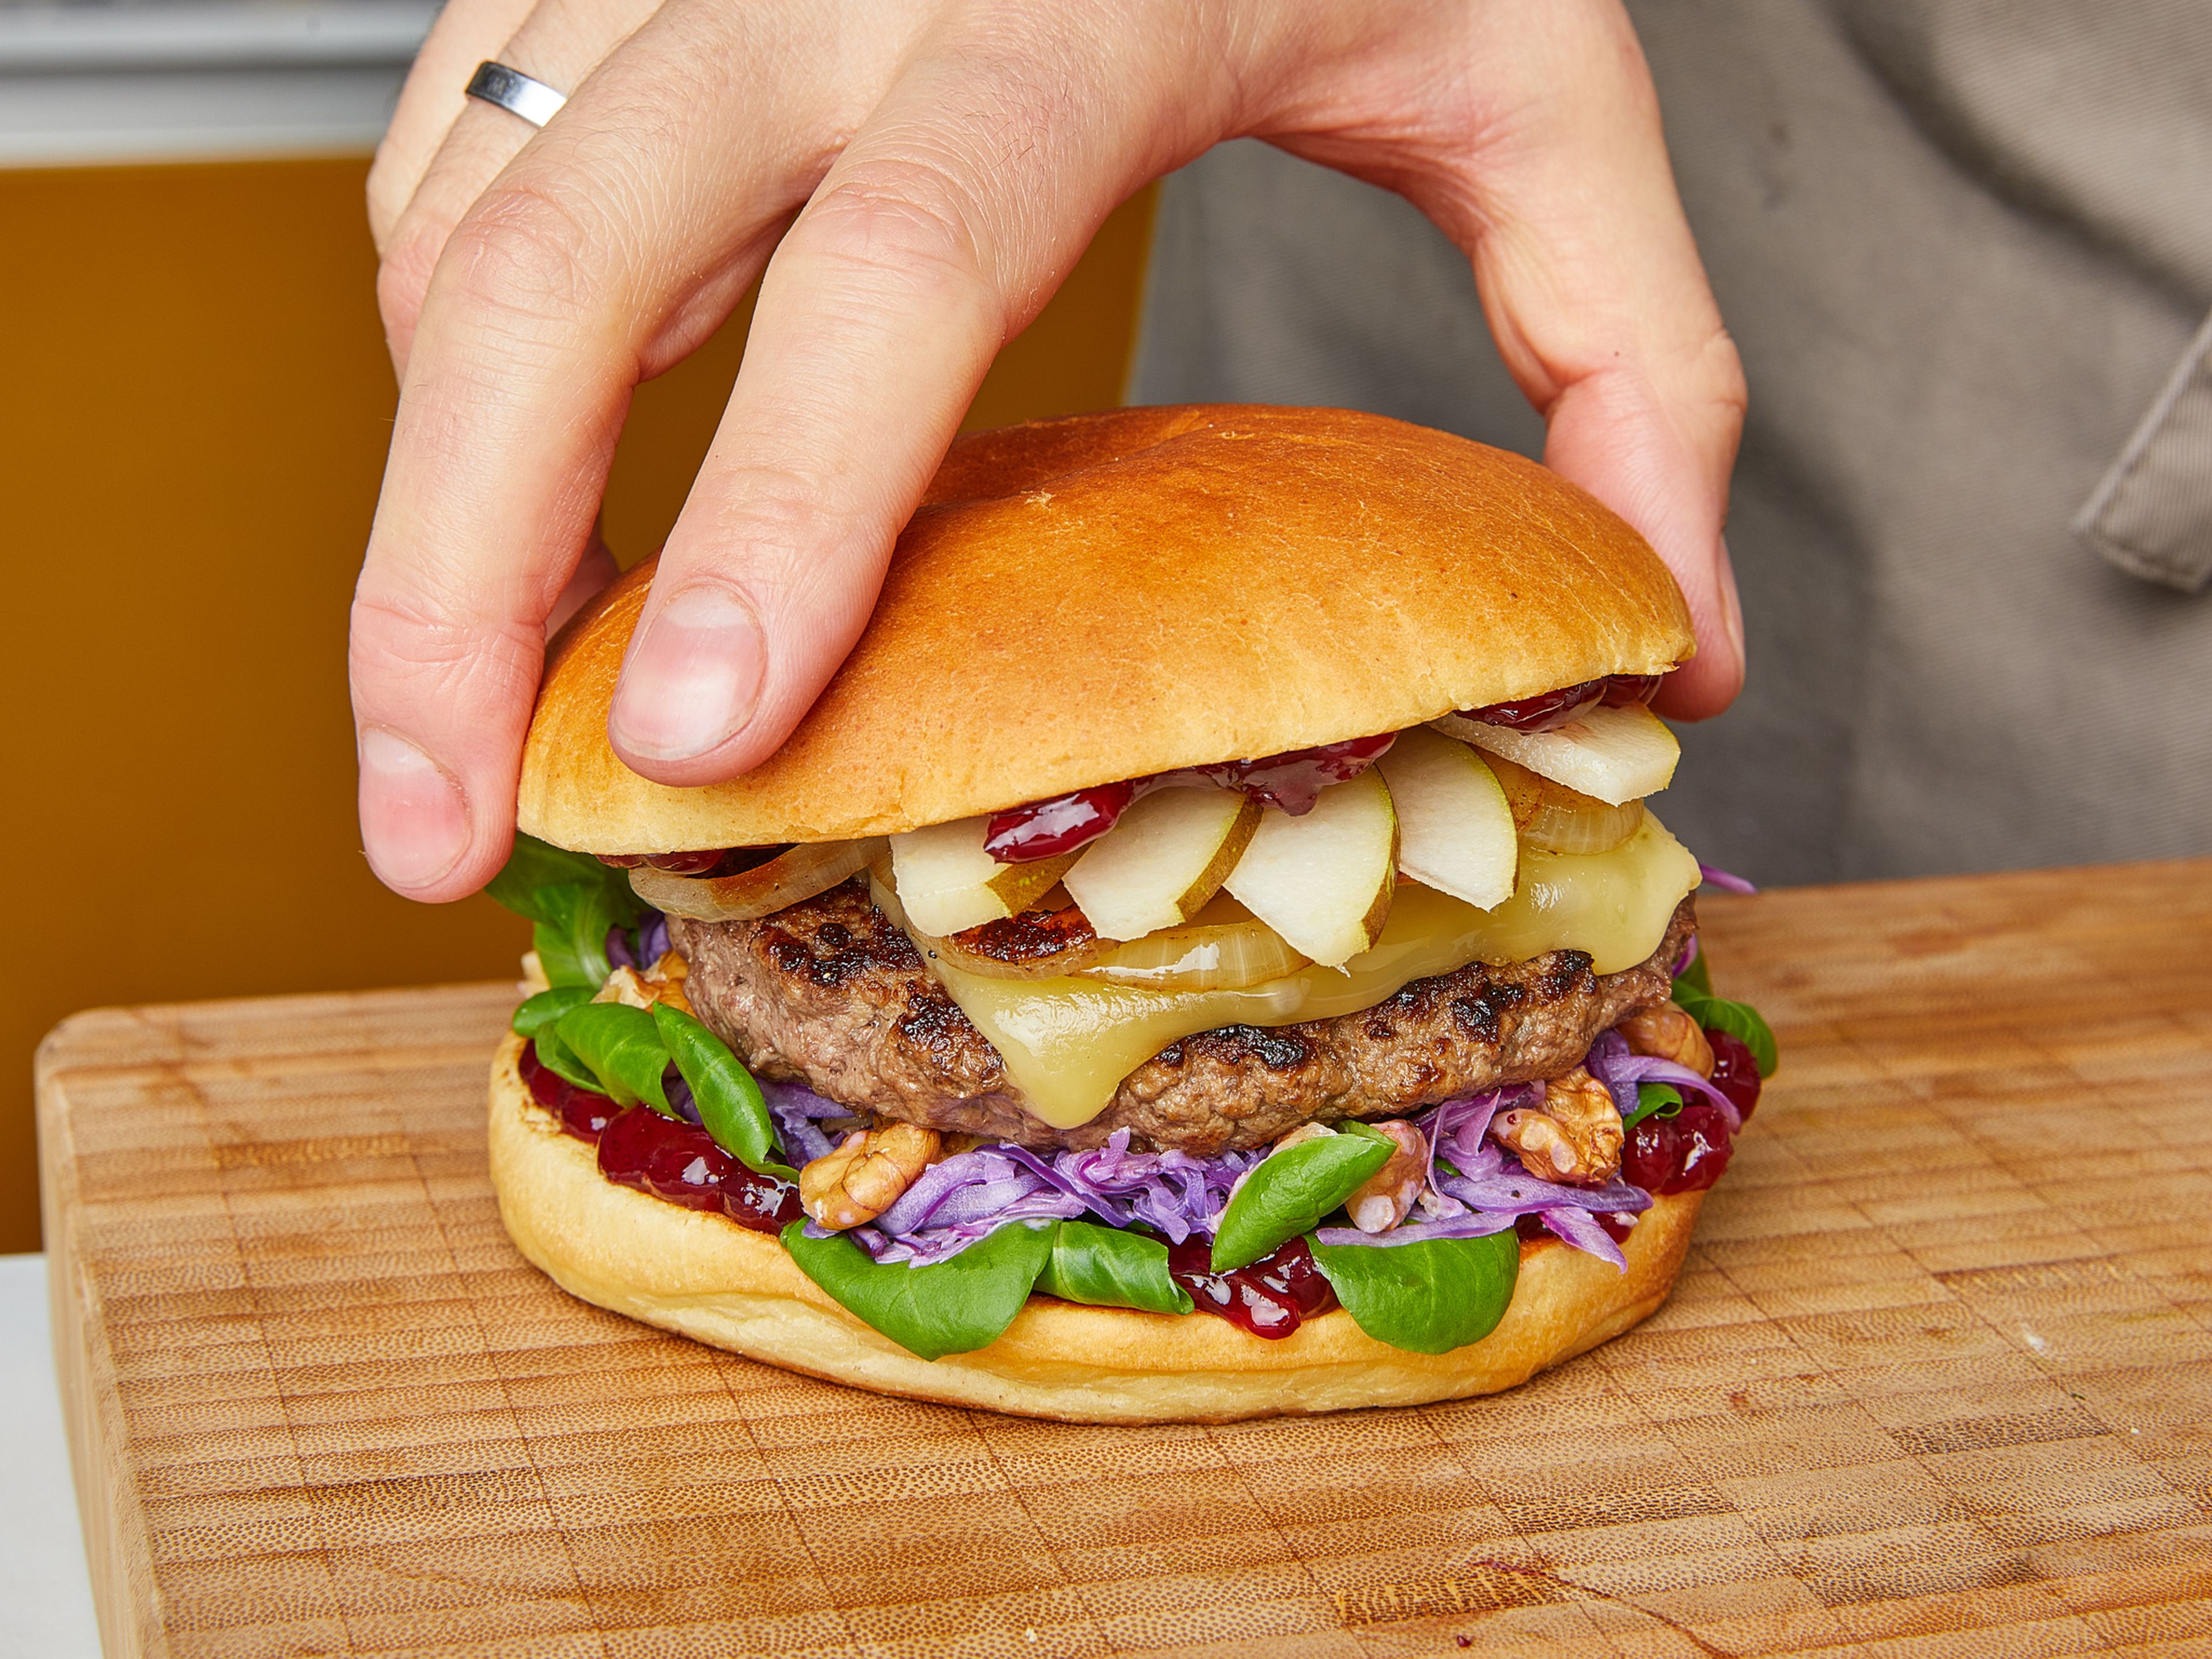 Spread a dollop of lingonberry jam on the toasted cut surfaces of all burger buns. Top buns with patties, onions, lettuce, red cabbage, and pear slices, then cover with the other half of burger buns. Serve immediately.